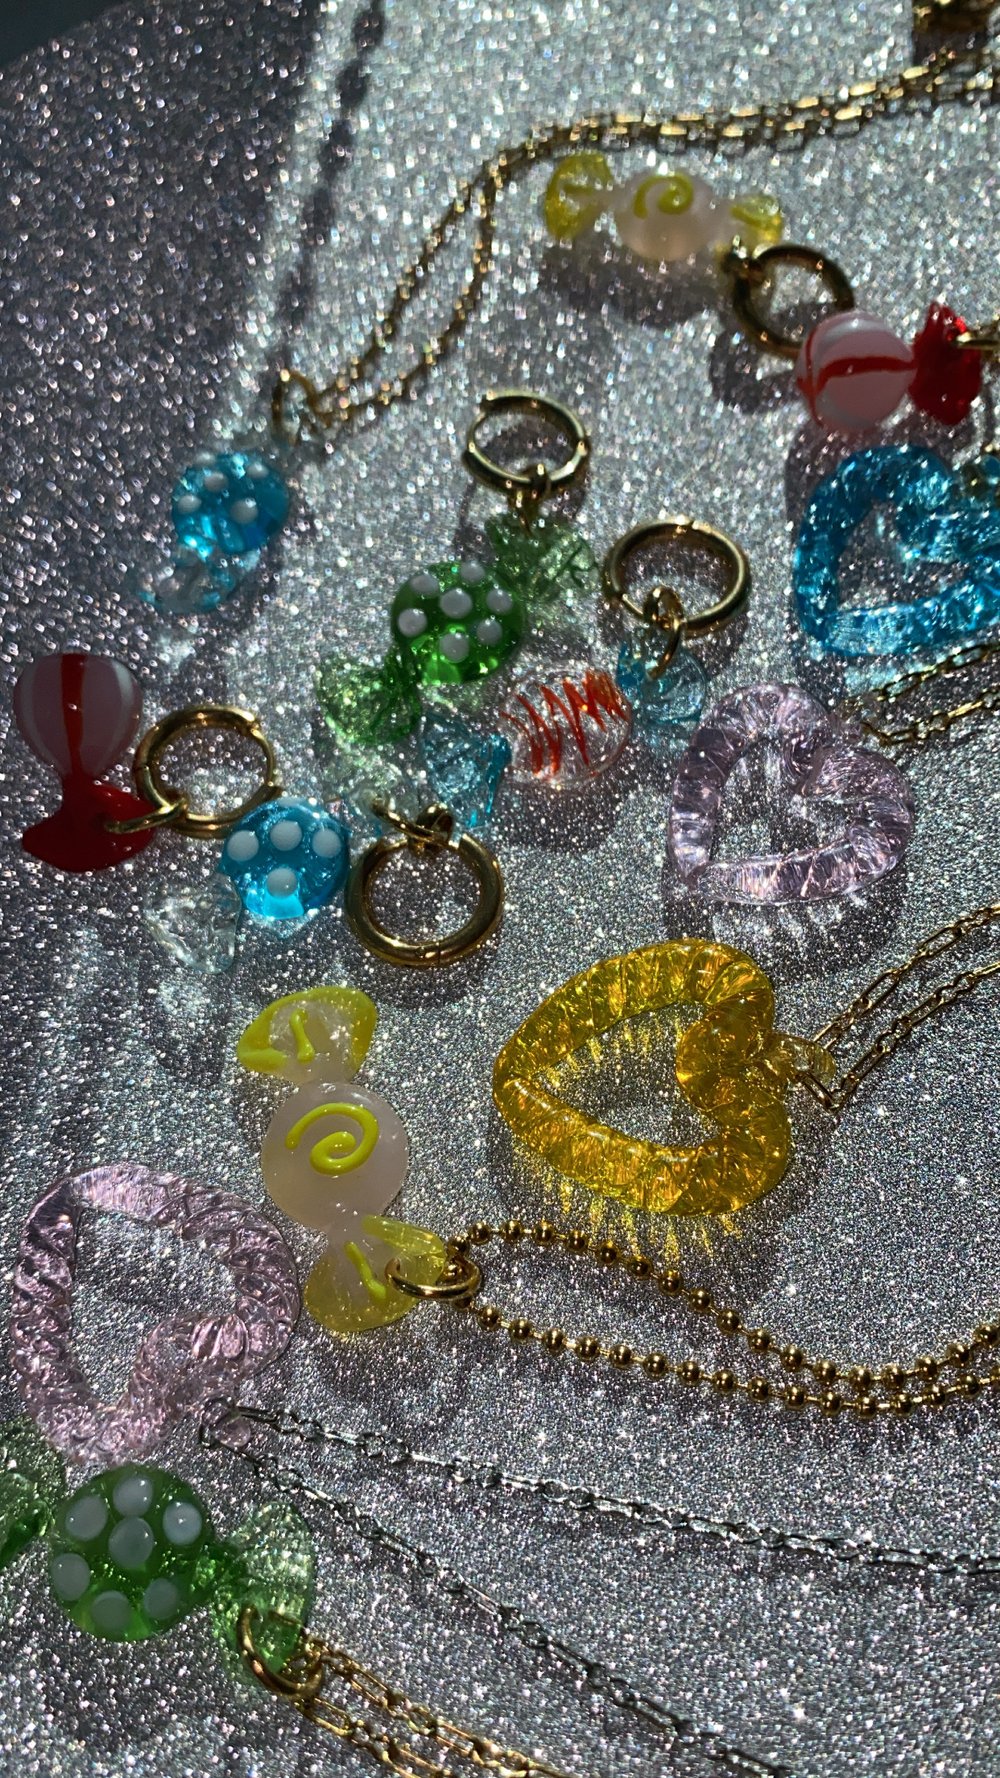 I WANT CANDY NECKLACE • MORE COLORS! — N O T T E